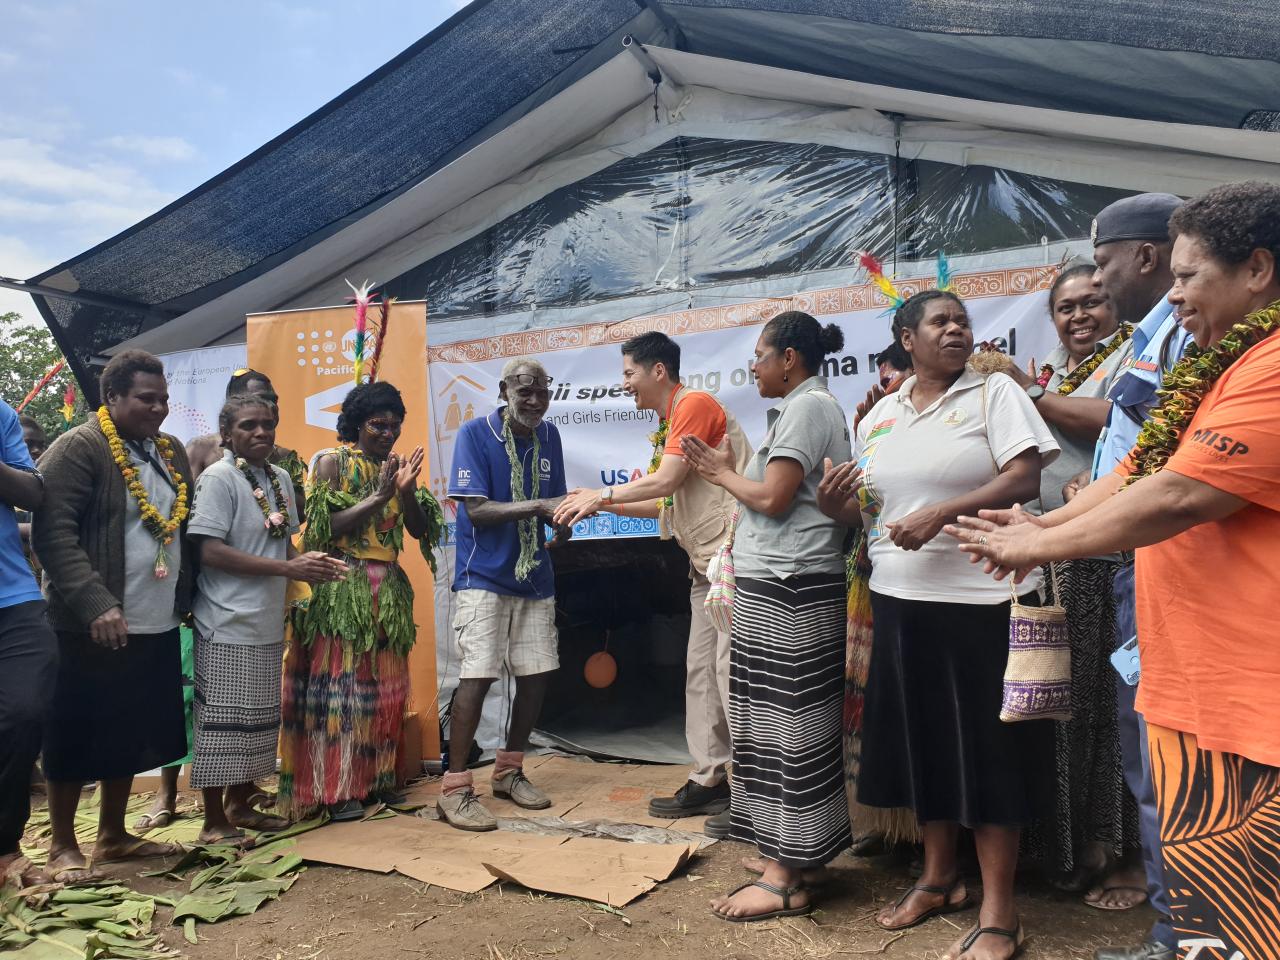 UNFPA Director, Iori Kato joining the community launch of Vanuatu’s first ever Women and Girls Friendly Space in Lenaken village, Tanna island.